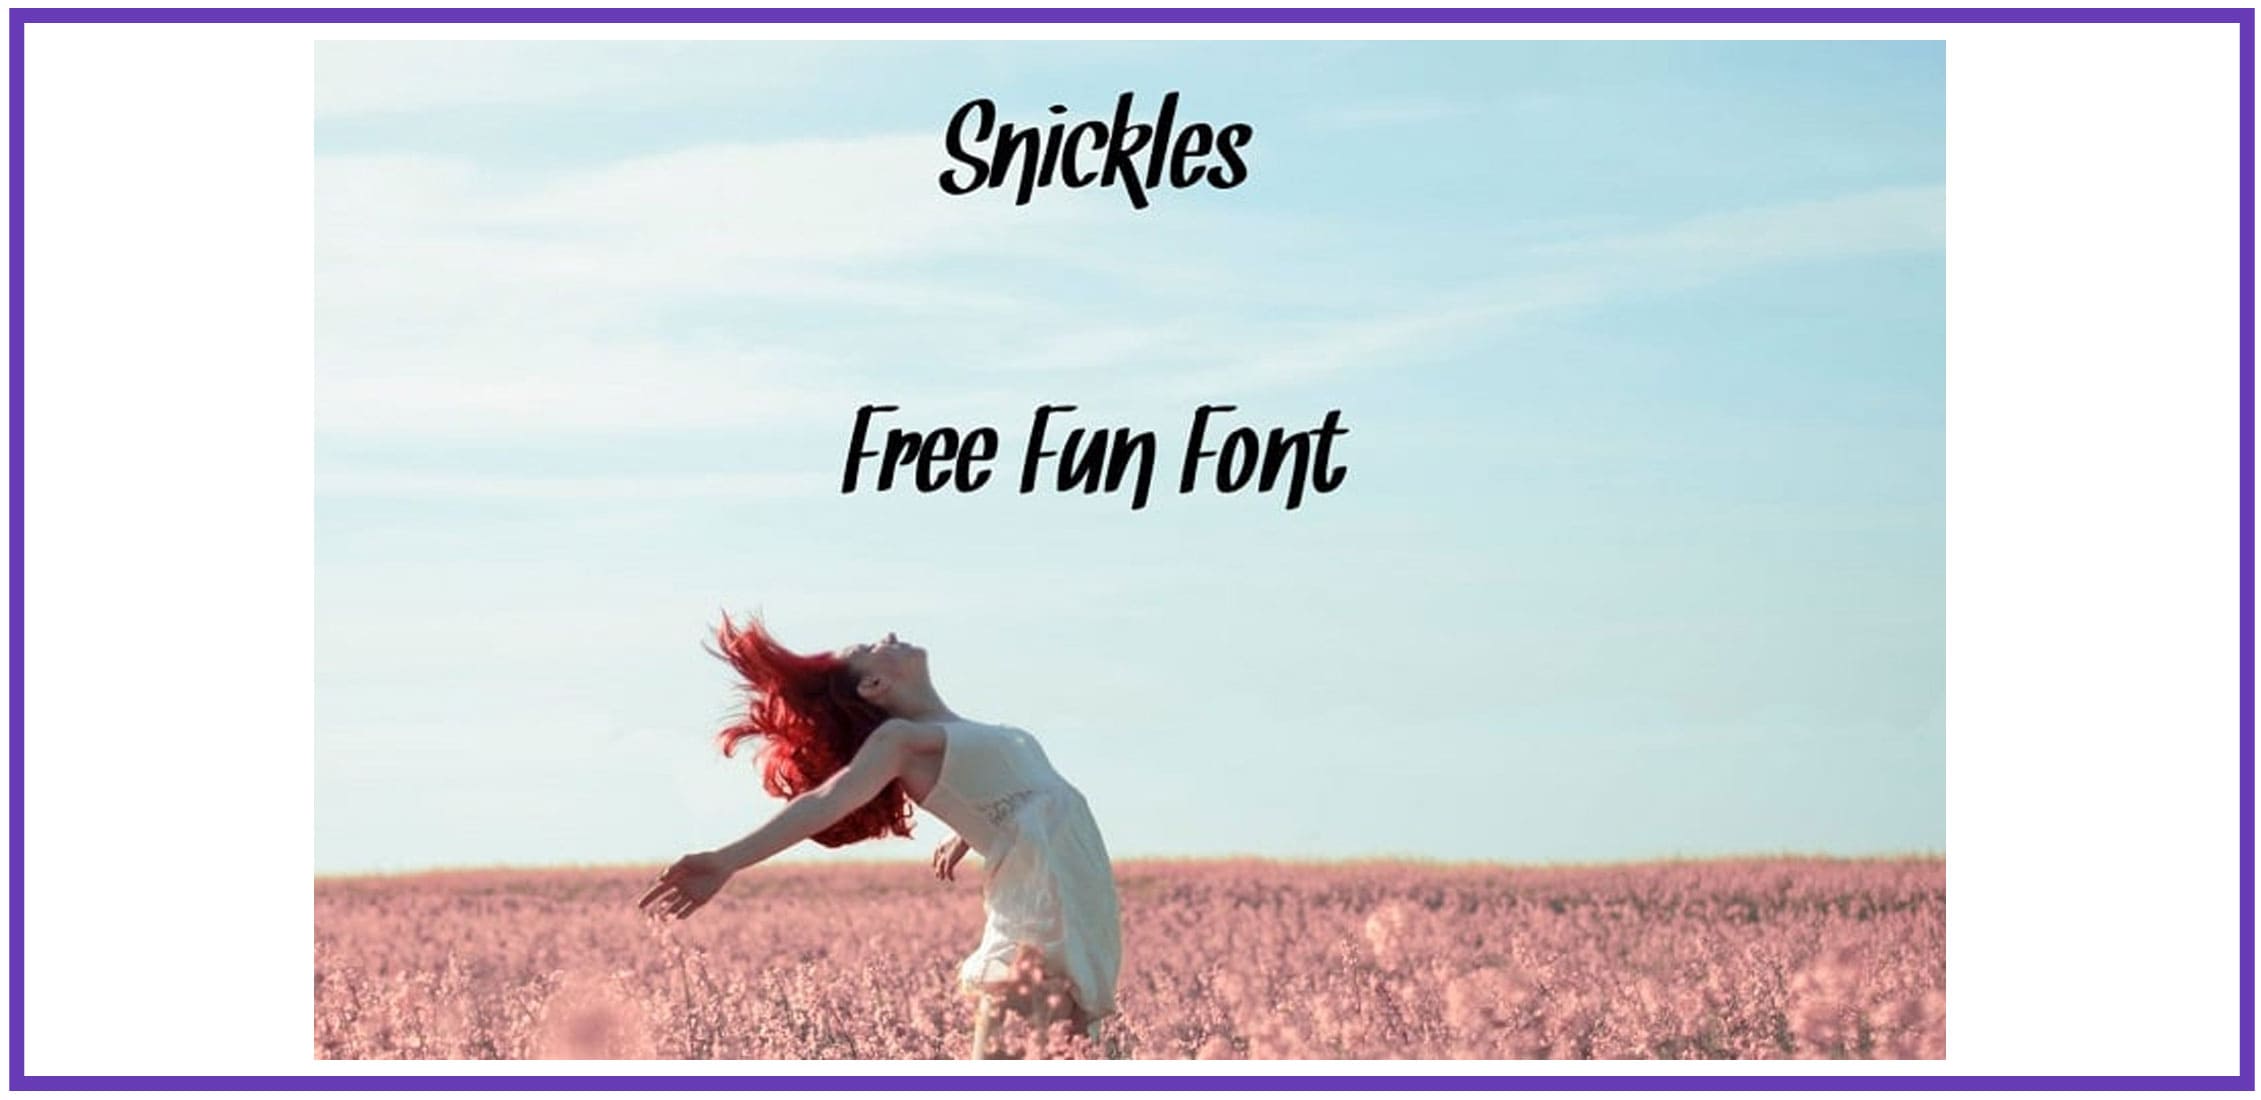 A red hair girl in a pink field and a display fun font.